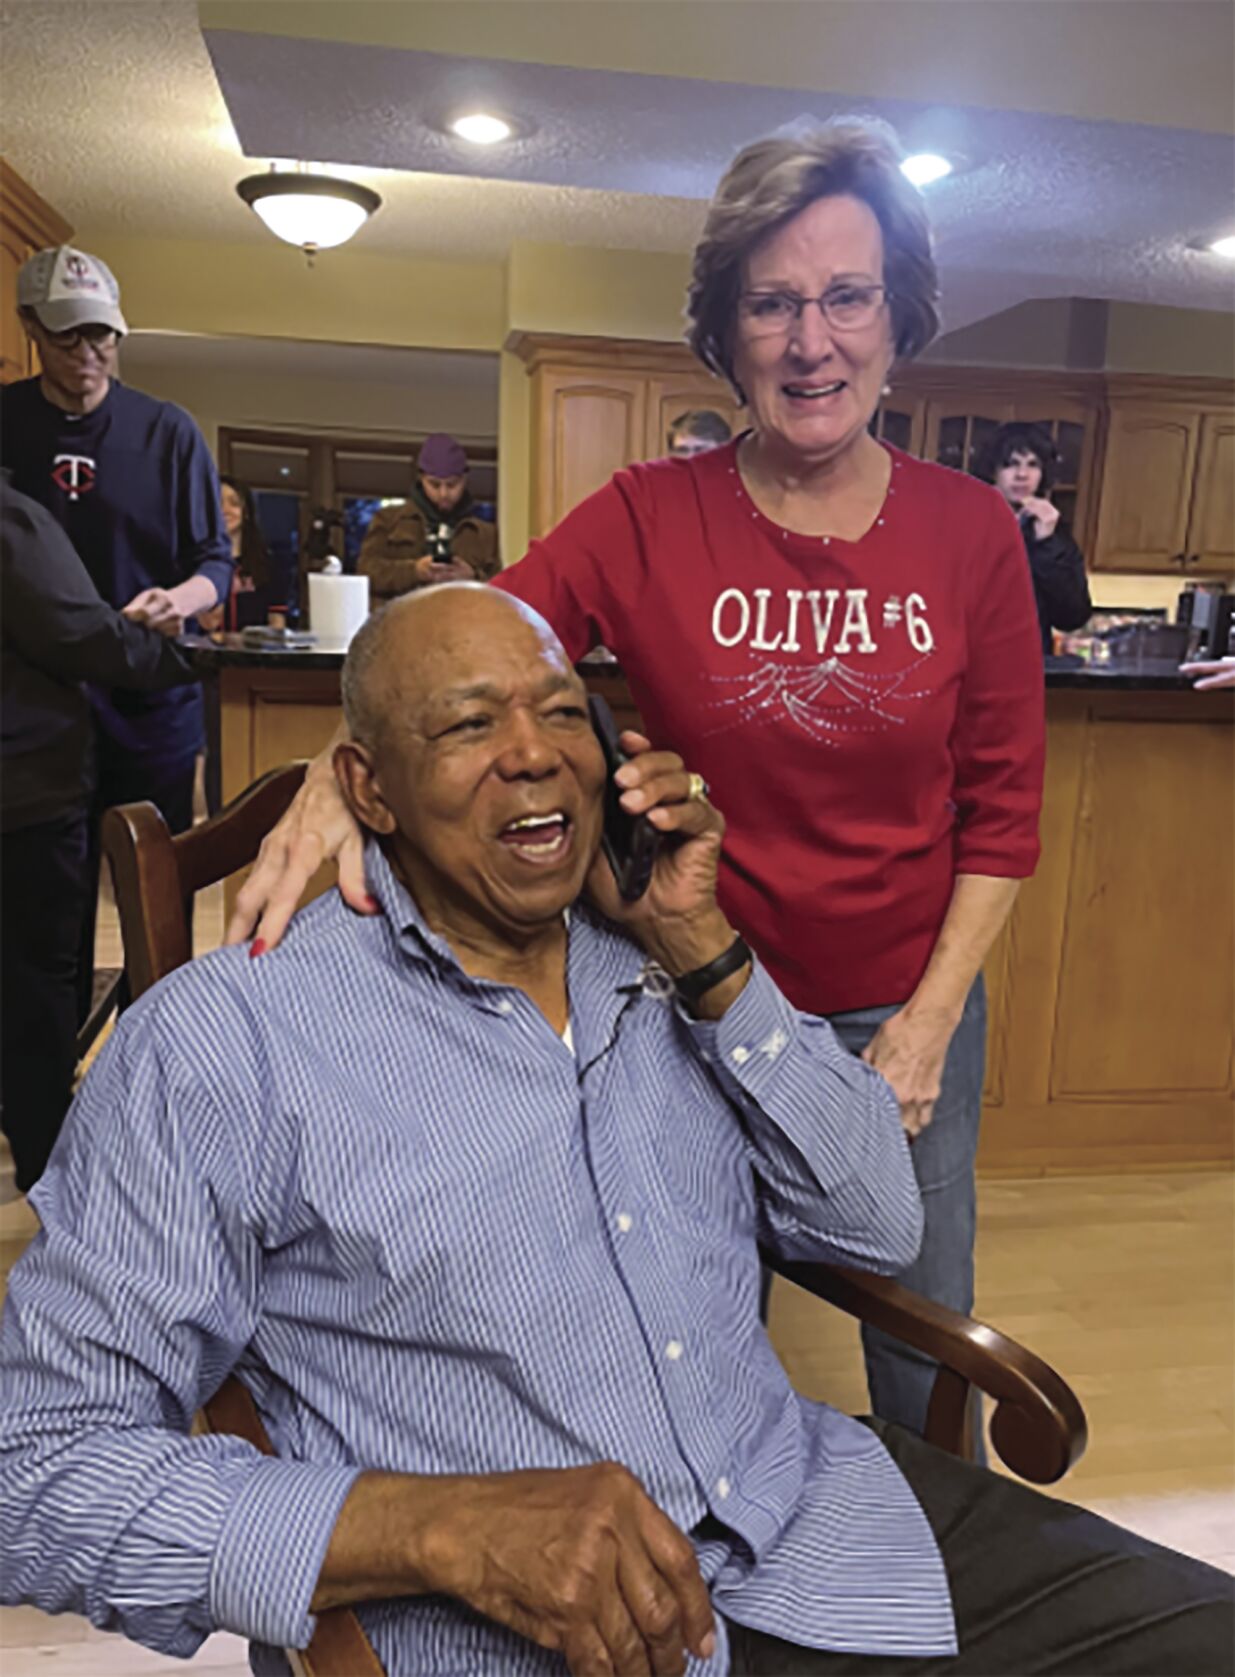 Hall of Fame inductee Tony Oliva, formerly of the Minnesota Twins